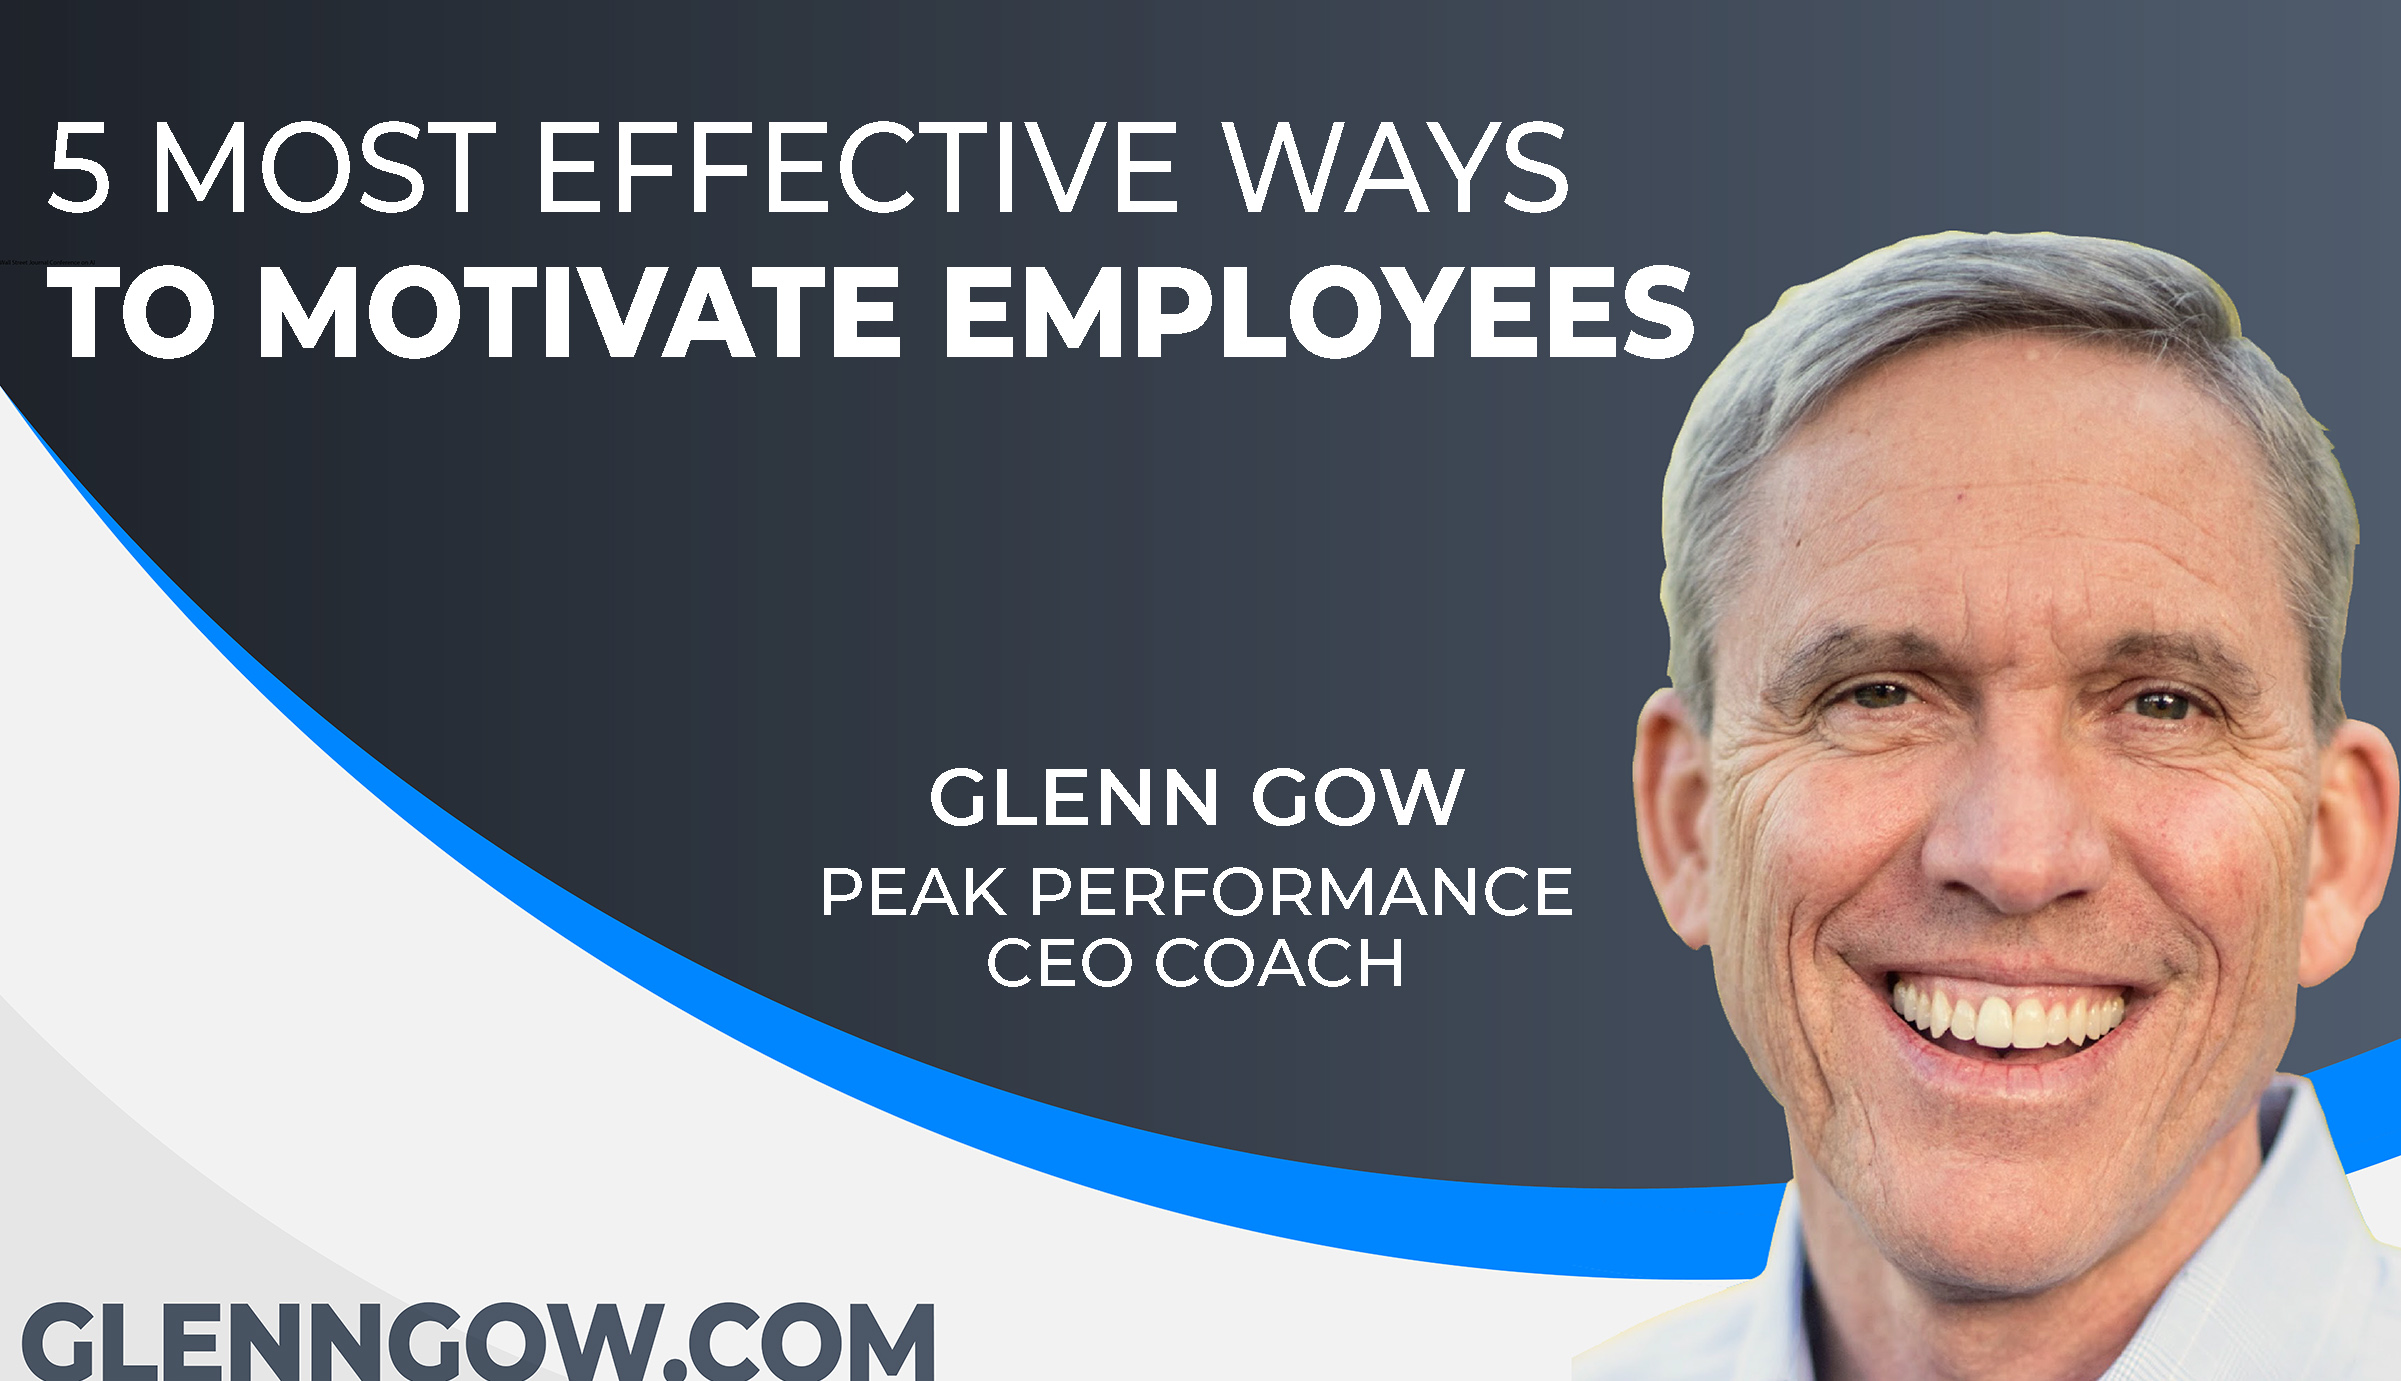 5 Most Effective Ways to Motivate Employees